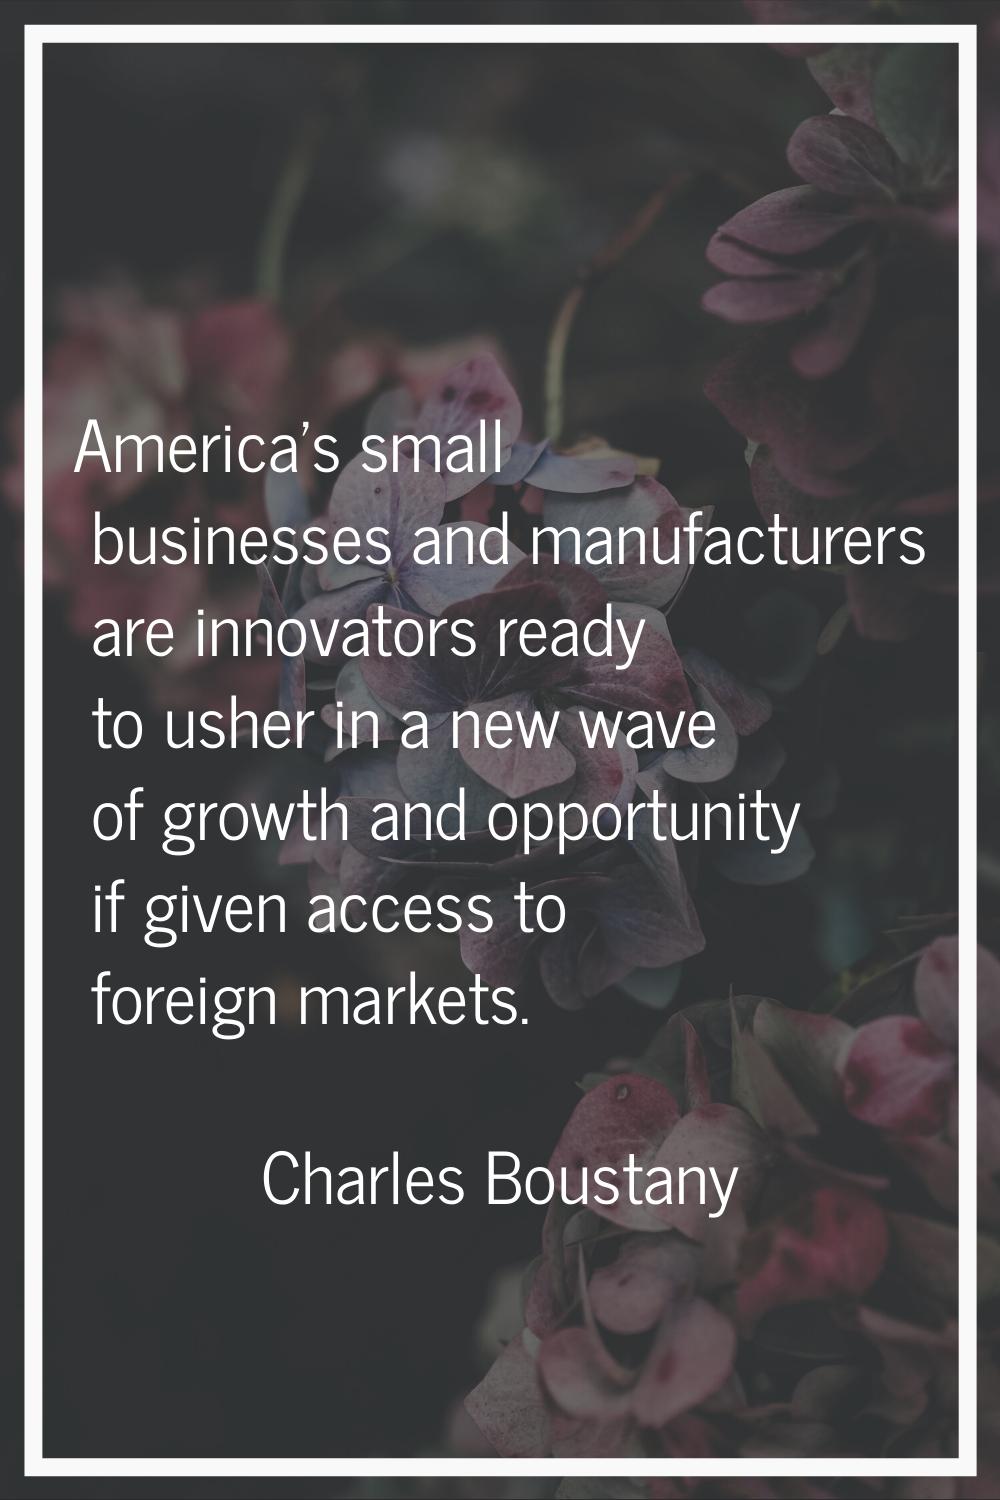 America's small businesses and manufacturers are innovators ready to usher in a new wave of growth 